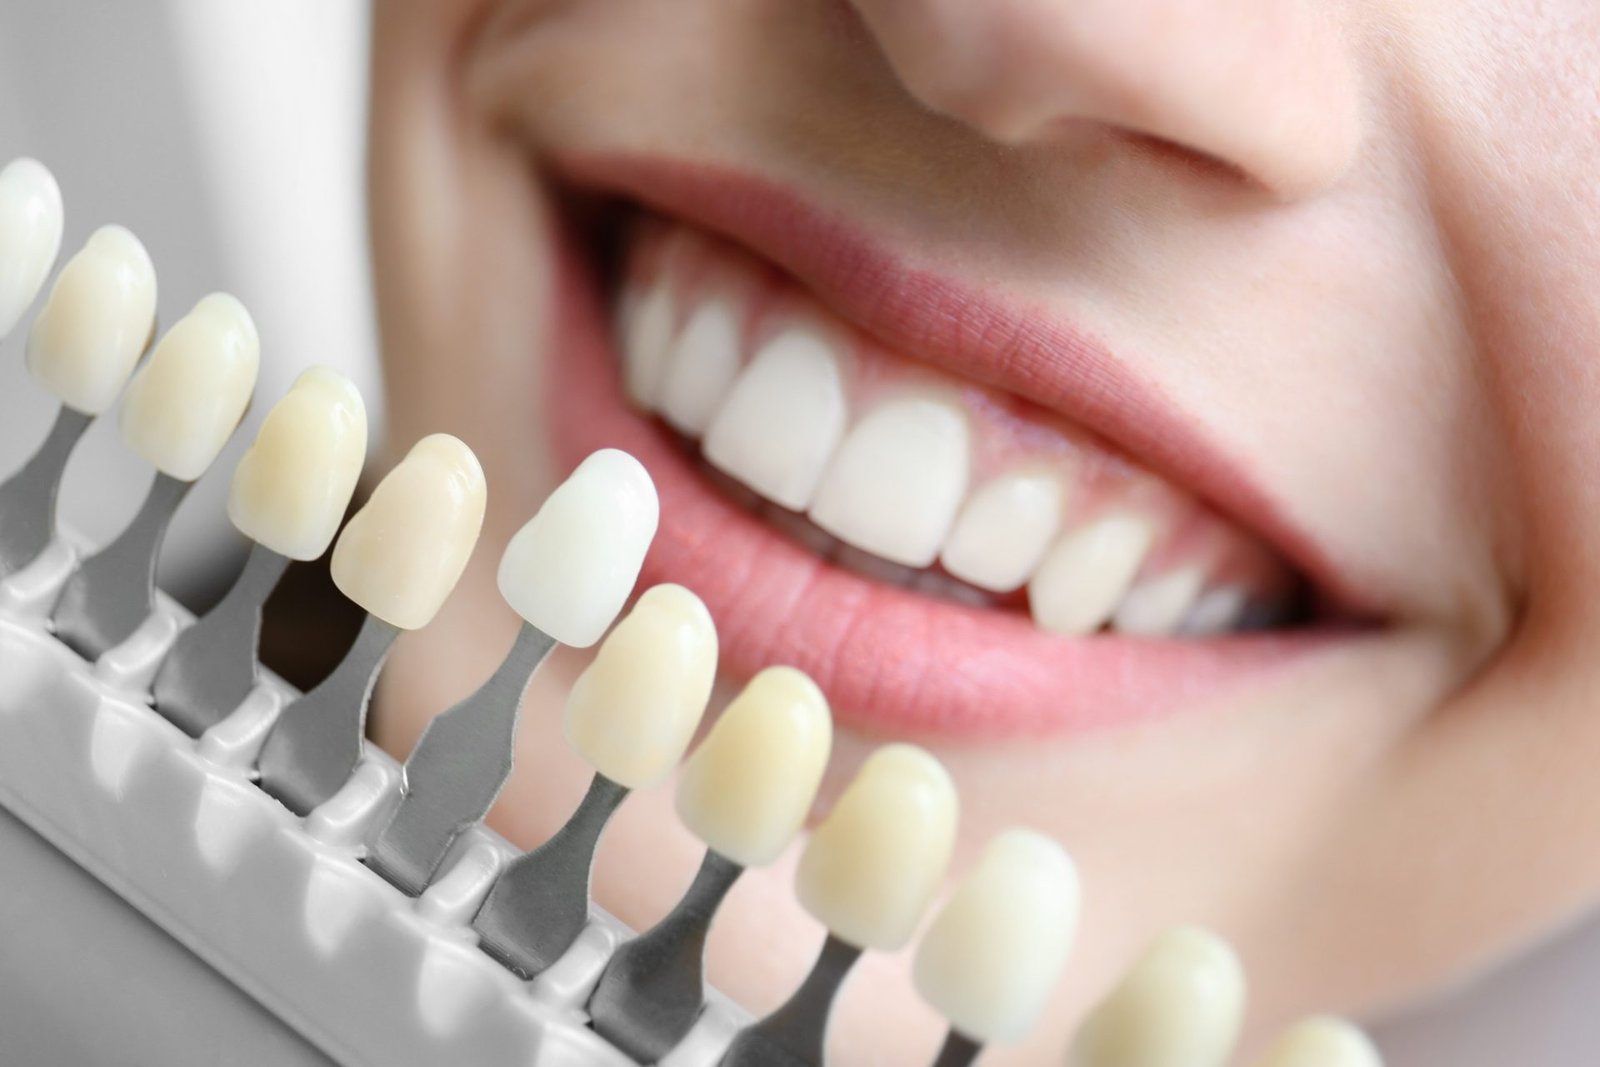 The Top Five Steps For Doing Dental Implants The Right Way